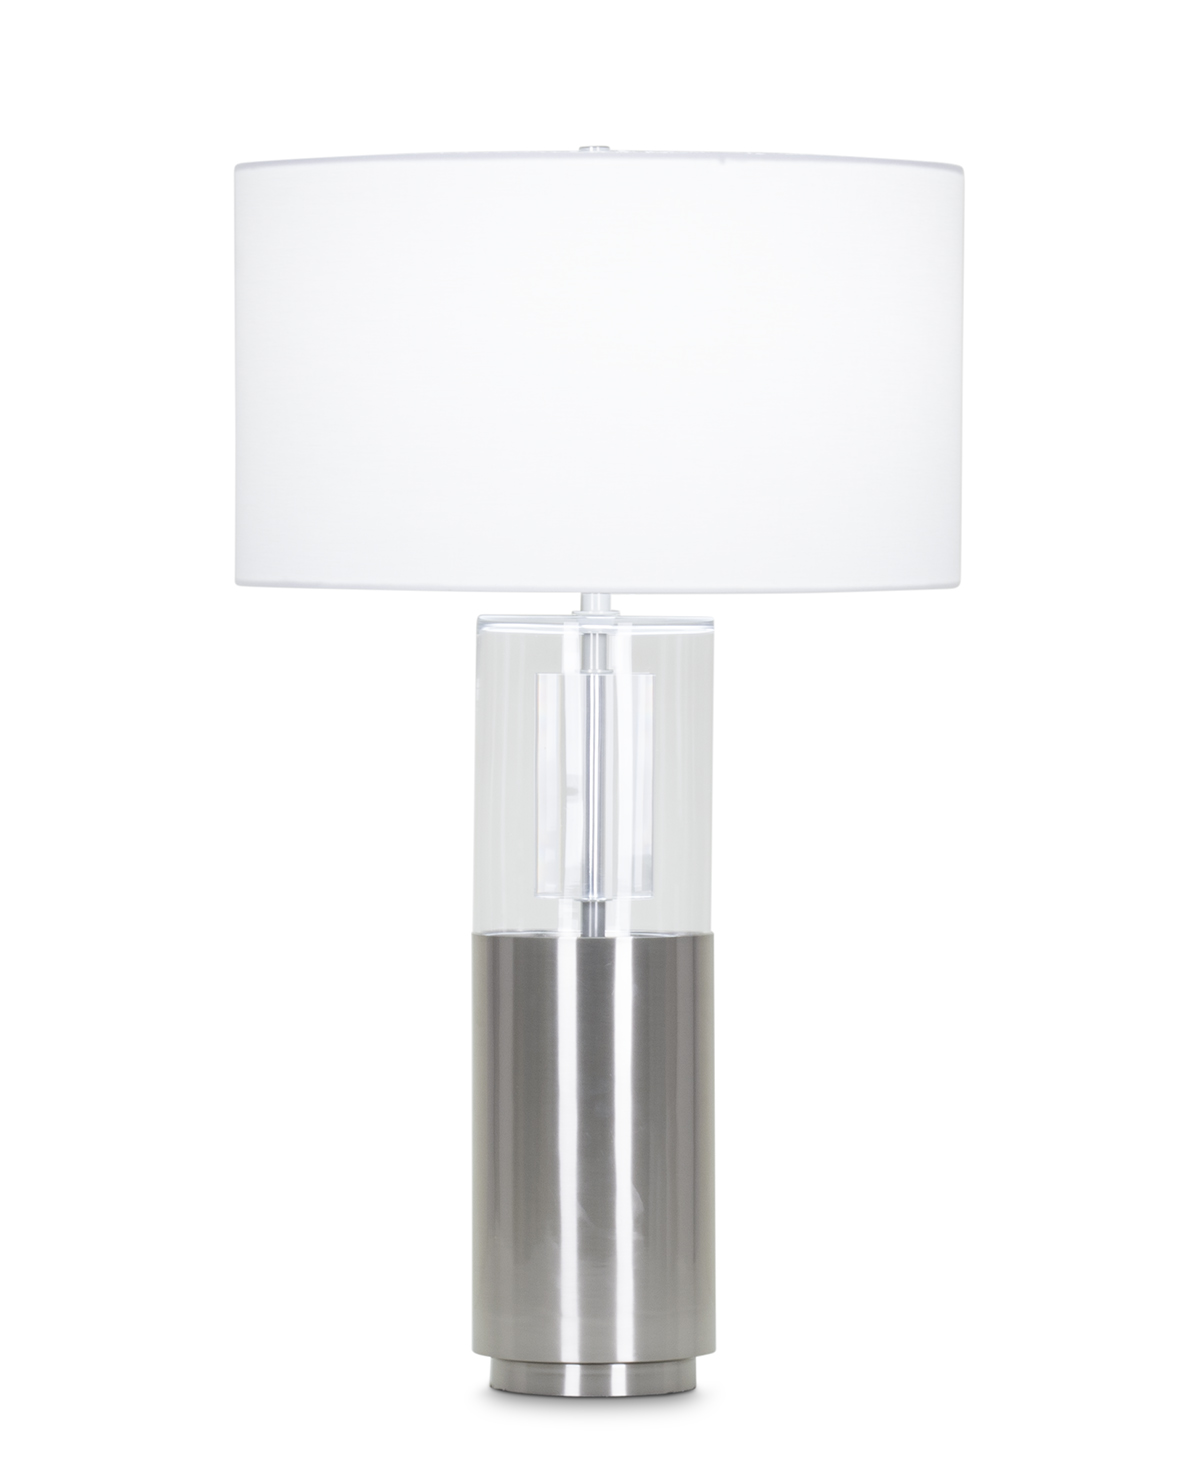 FlowDecor Alexander Table Lamp in metal with brushed nickel finish and white linen drum shade (# 3961)